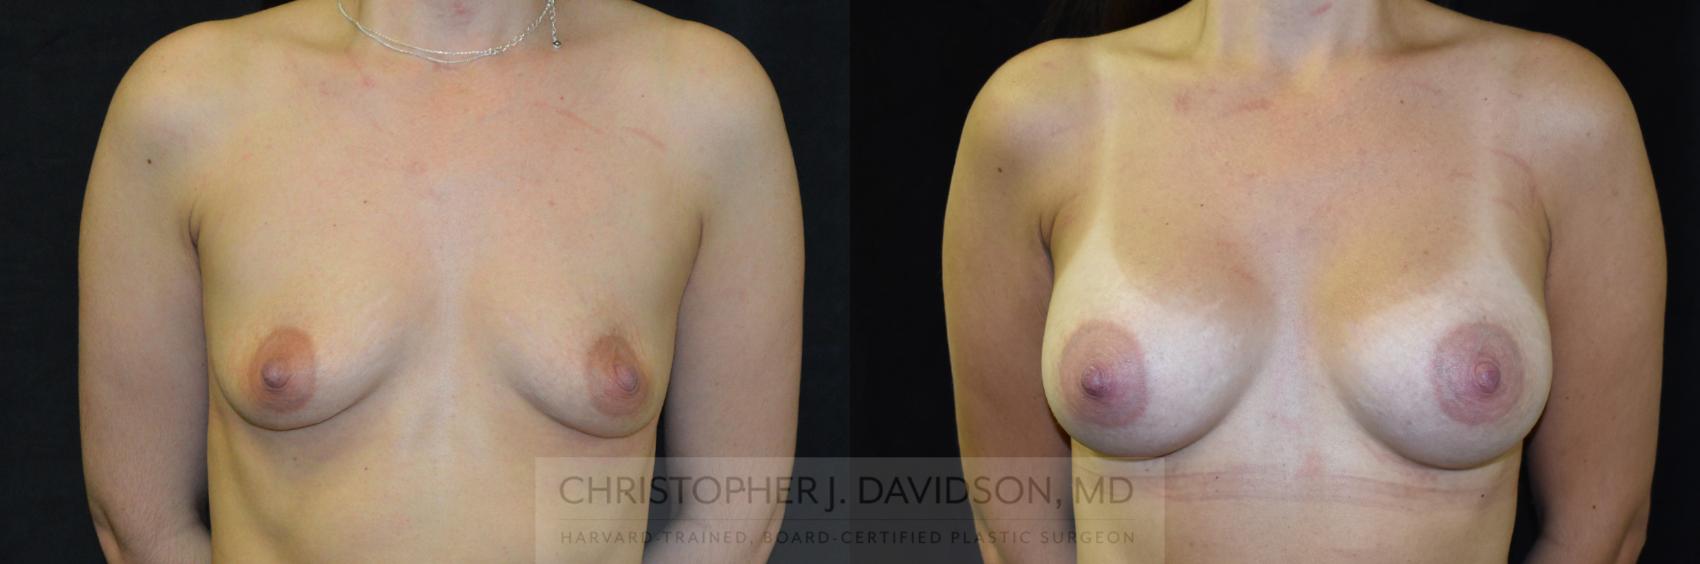 Breast Augmentation with Crisalix Preview Case 250 Before & After View #1 | Boston, MA | Christopher J. Davidson, MD